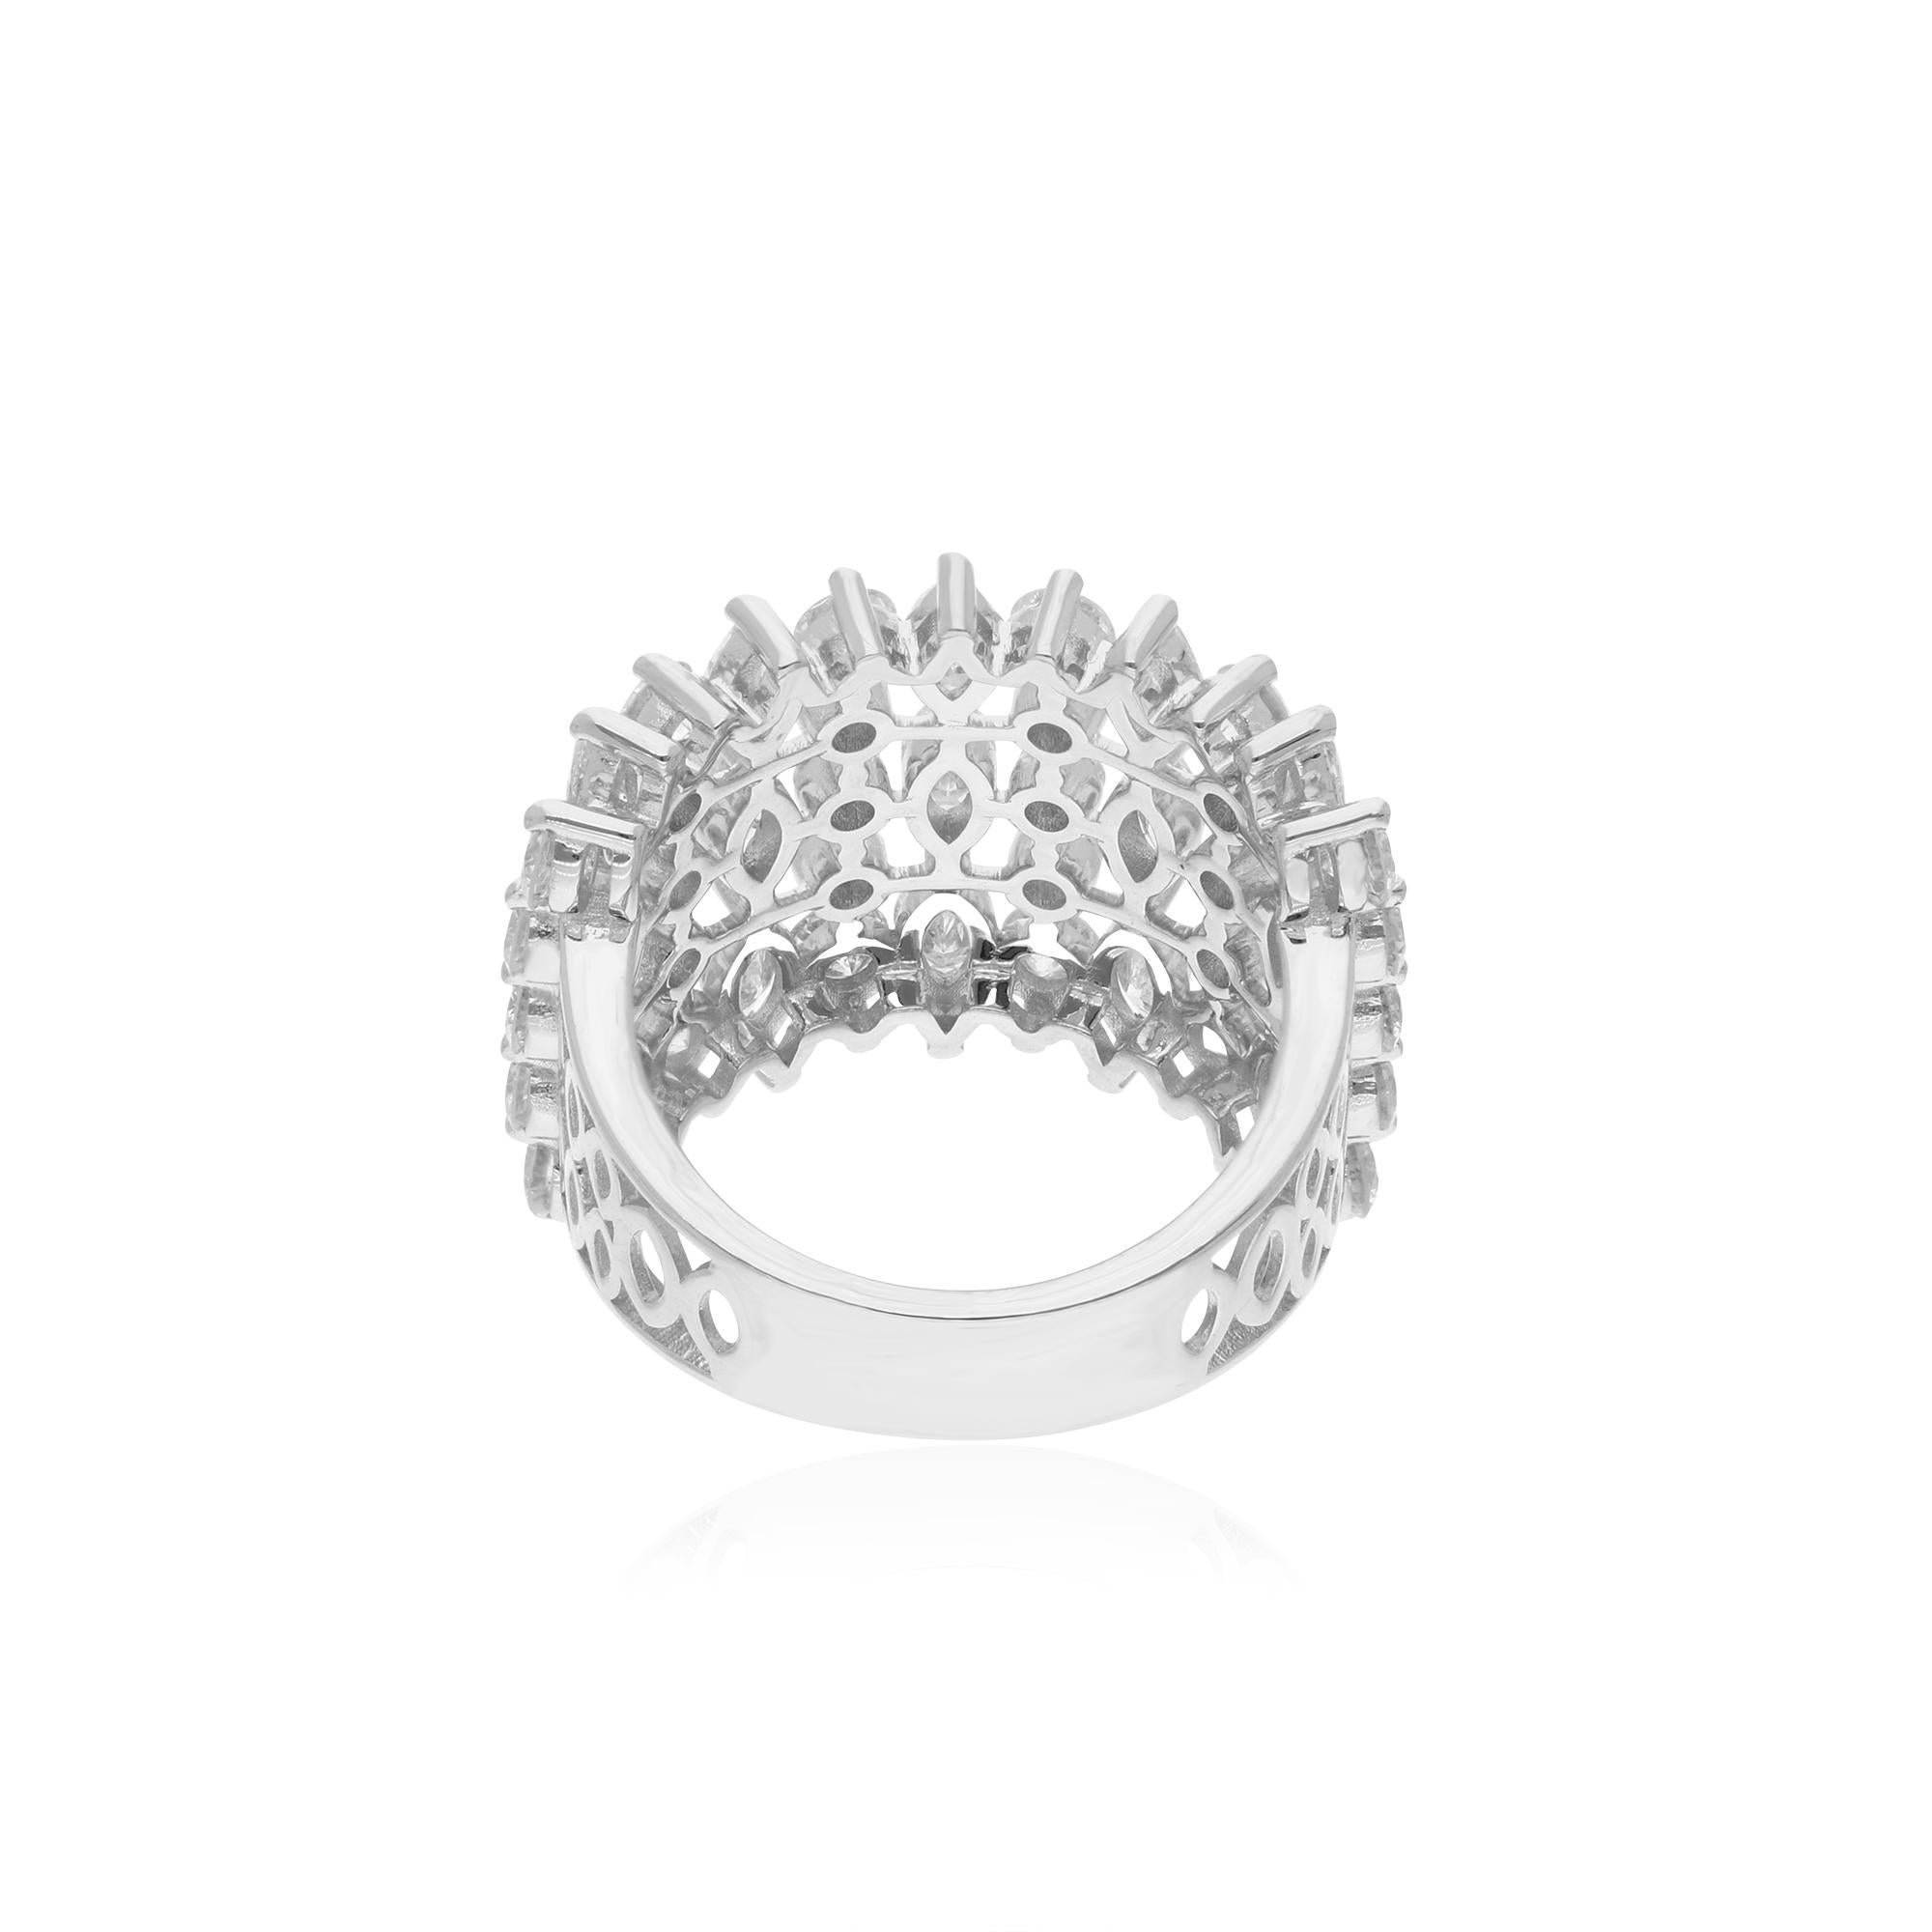 Women's 3.99 Carat Marquise & Round Diamond Cage Ring 18 Karat White Gold Fine Jewelry For Sale